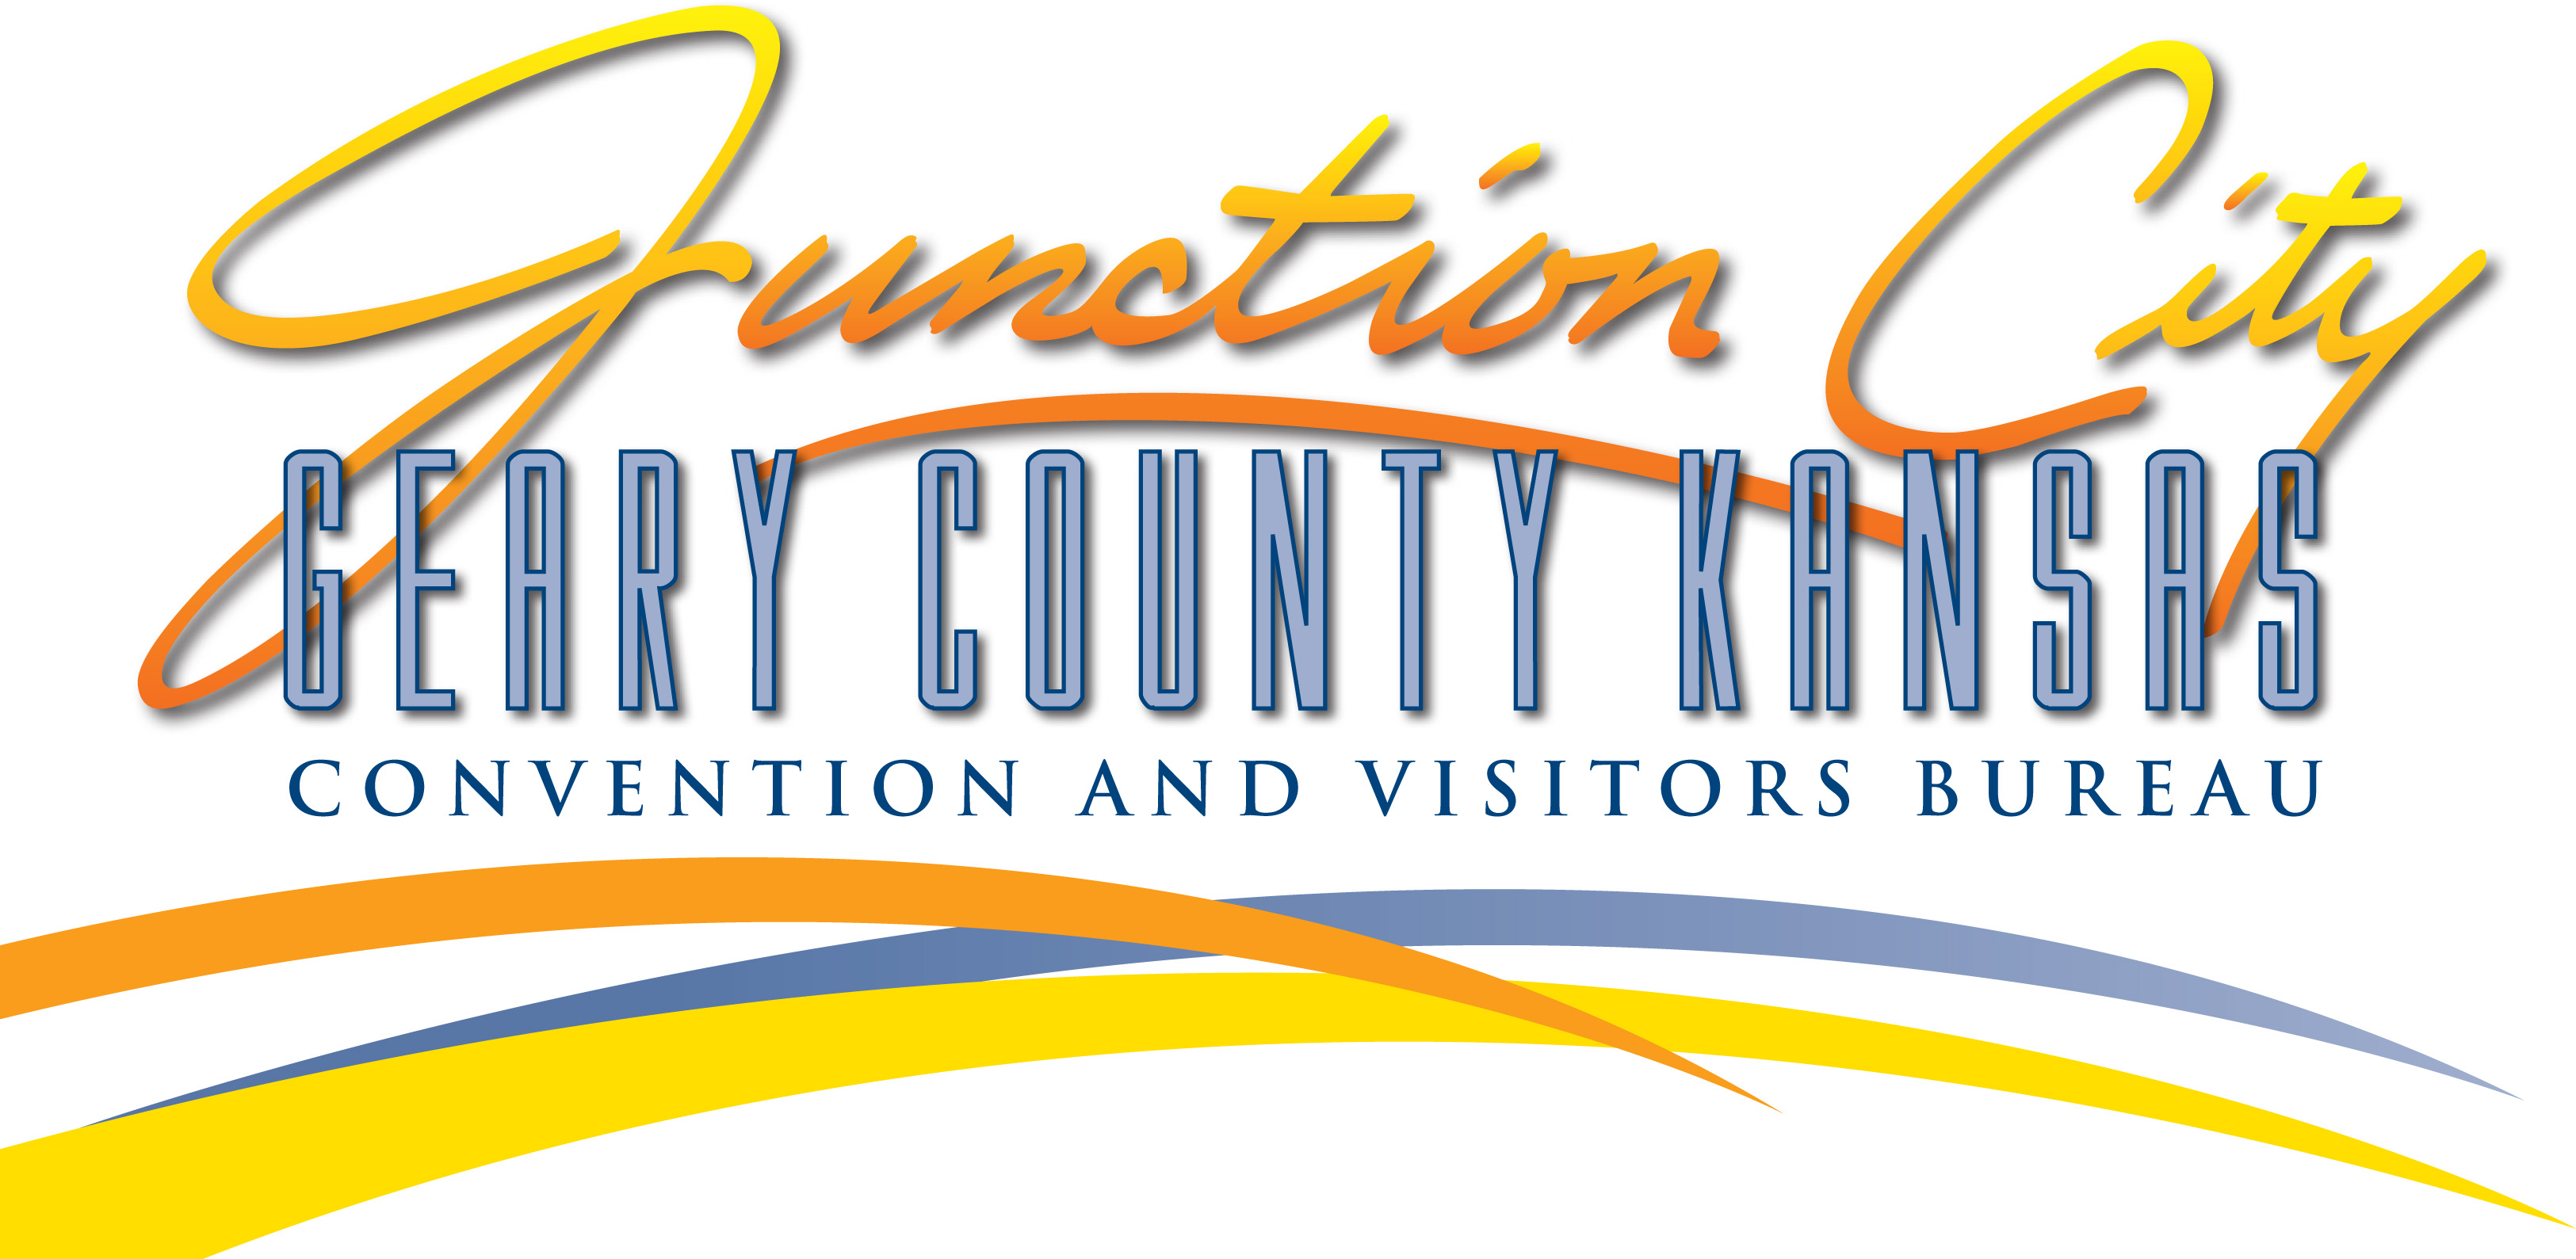 Geary County Convention and Visitors Bureau